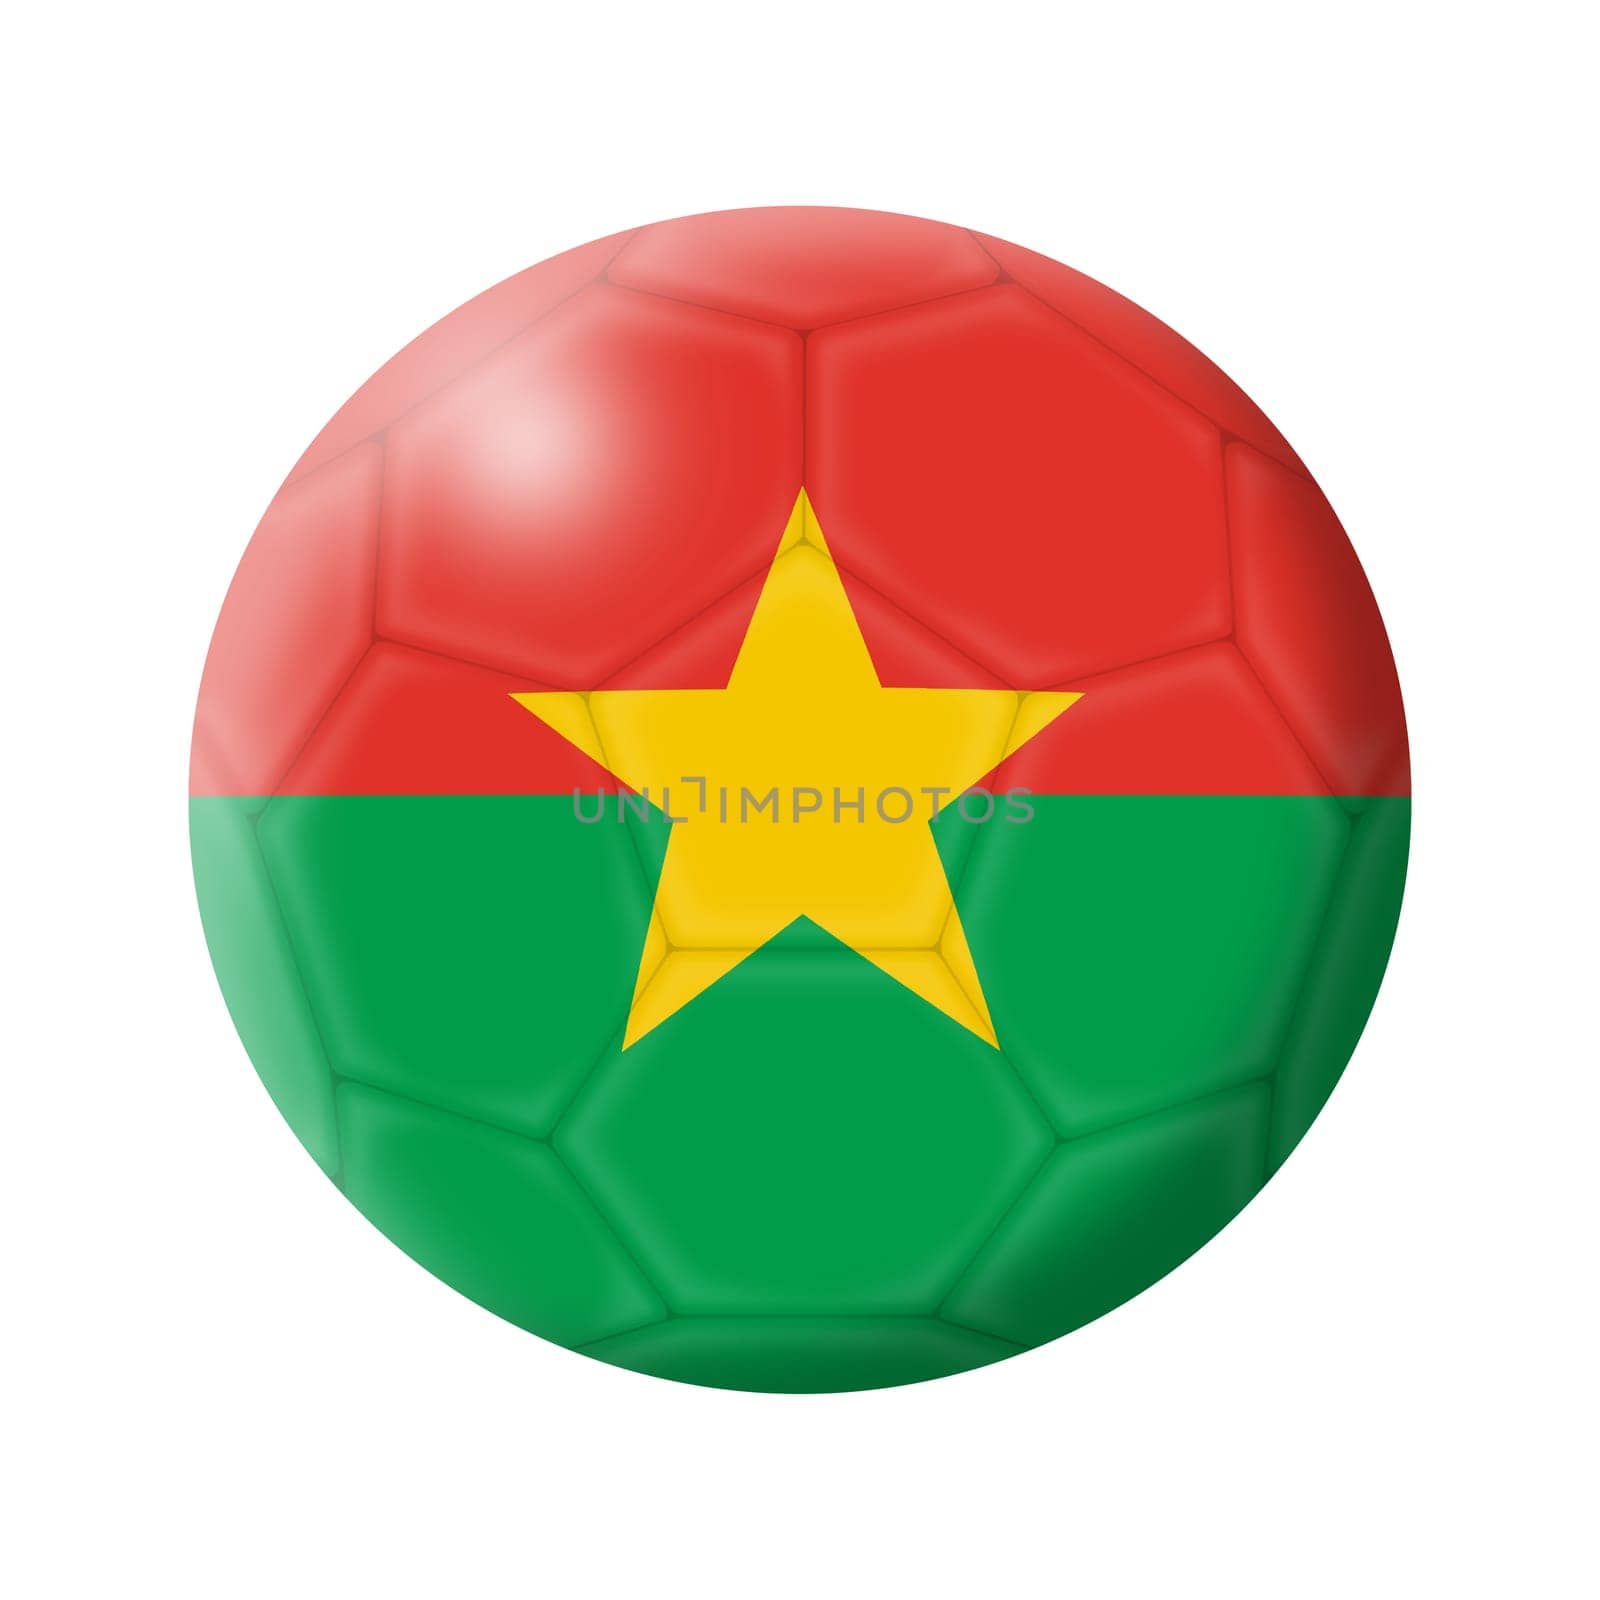 A Burkina soccer ball football 3d illustration isolated on white with clipping path